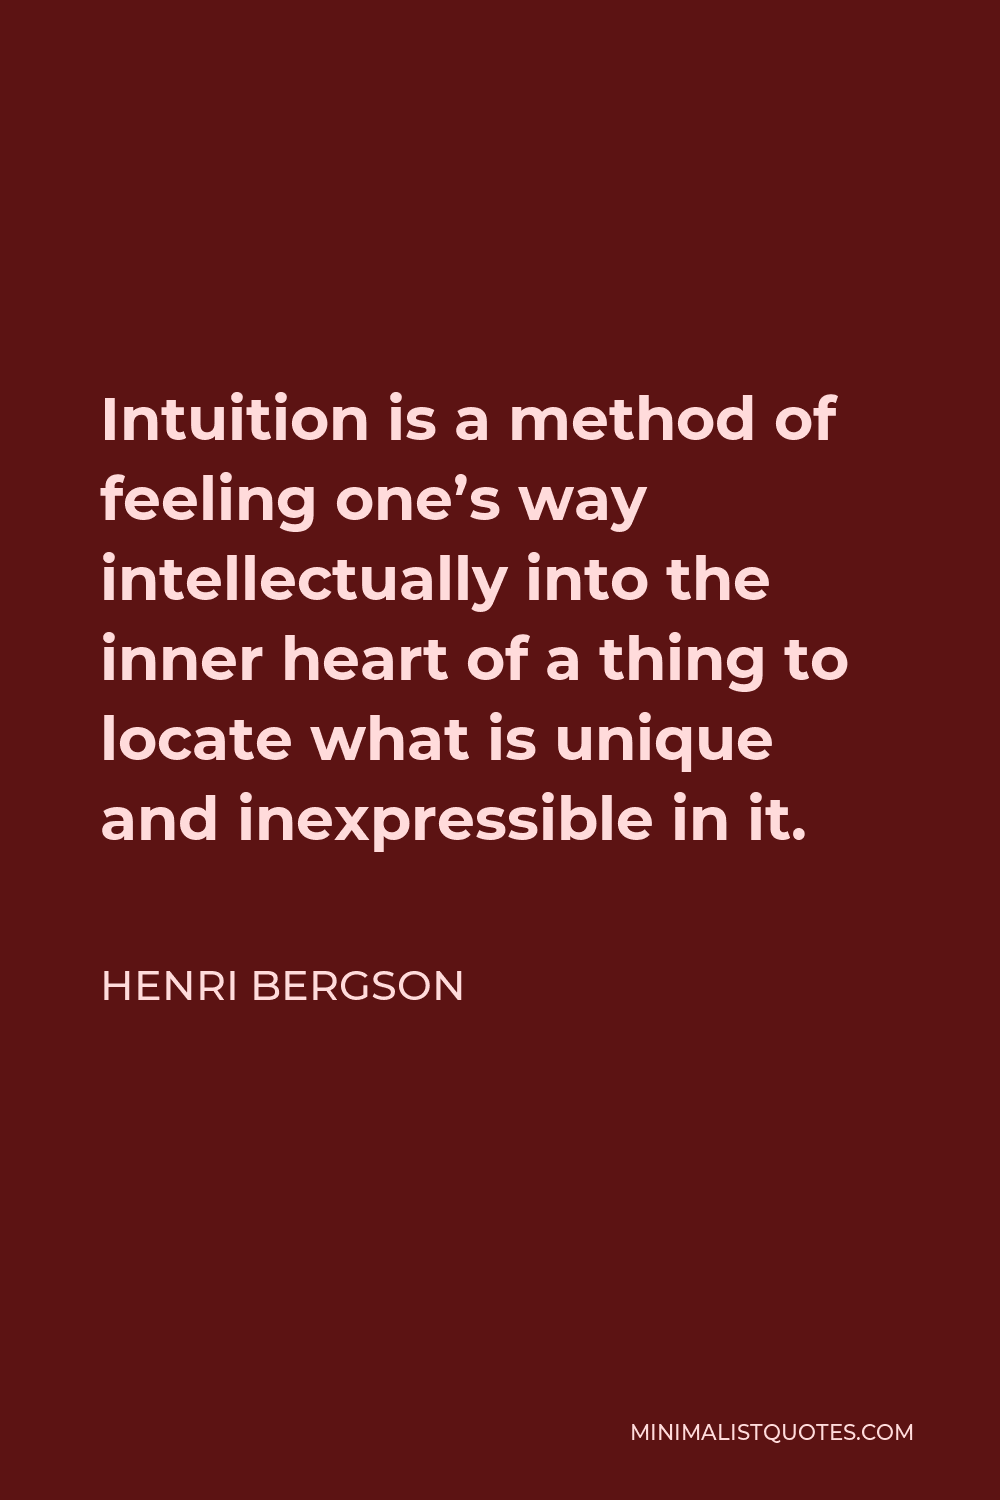 Henri Bergson Quote - Intuition is a method of feeling one’s way intellectually into the inner heart of a thing to locate what is unique and inexpressible in it.